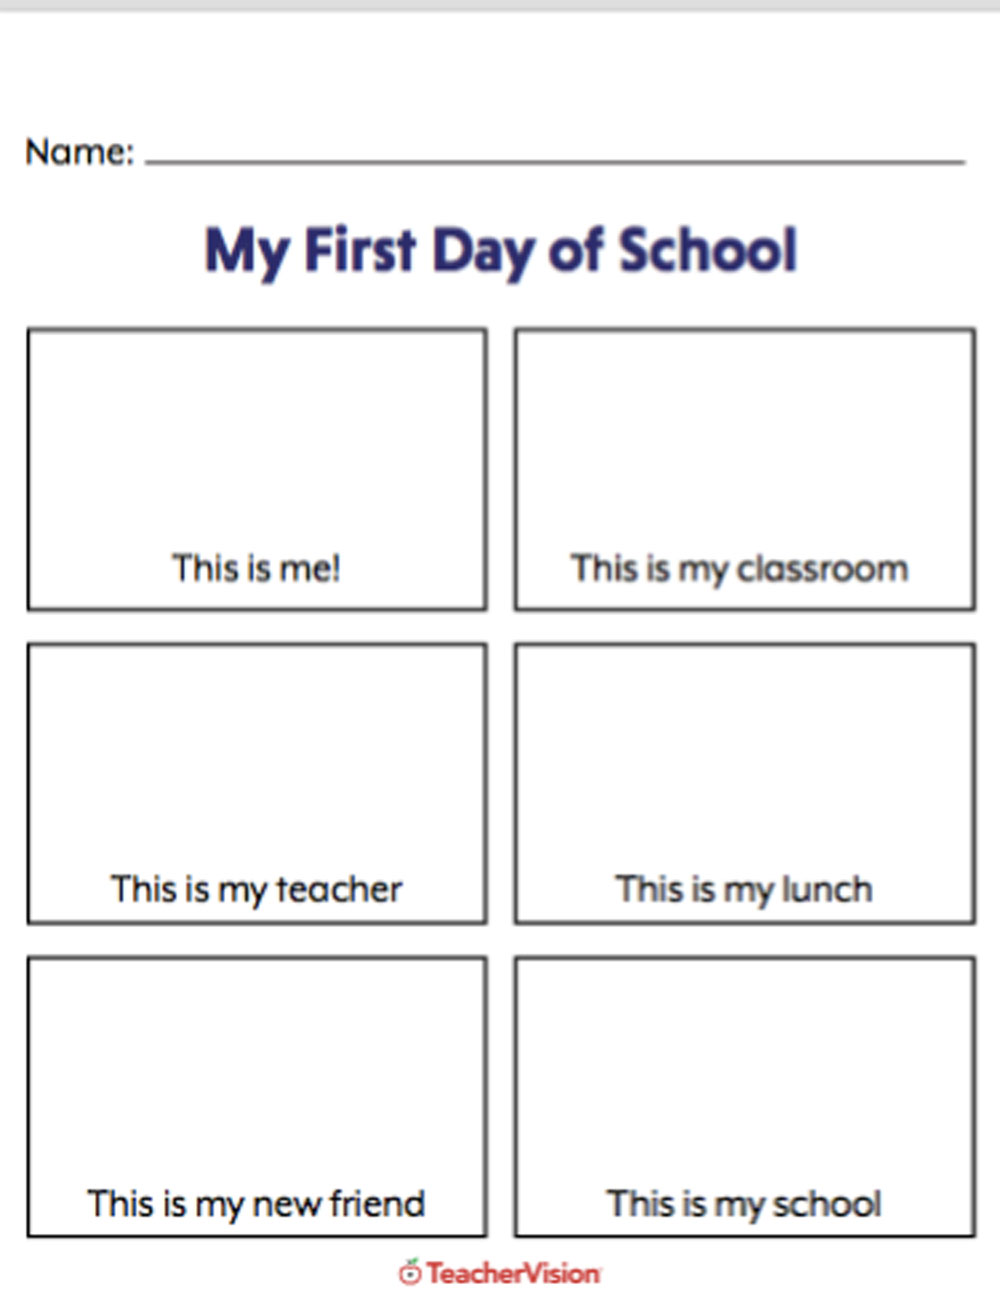 my-first-day-of-school-picture-activity-teachervision